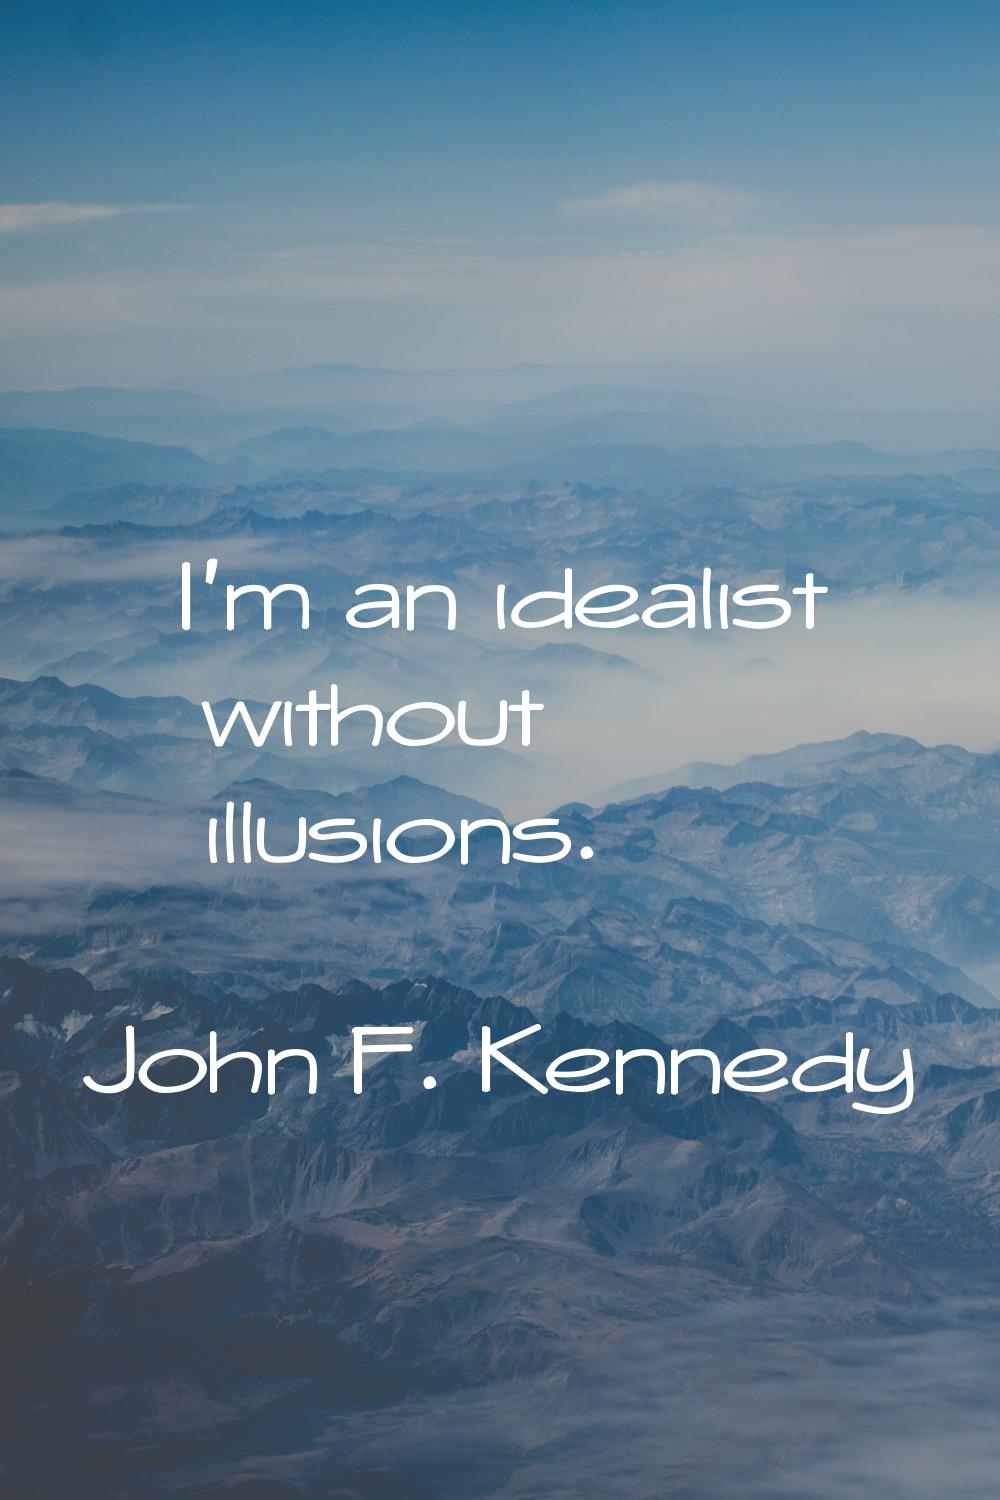 I'm an idealist without illusions.